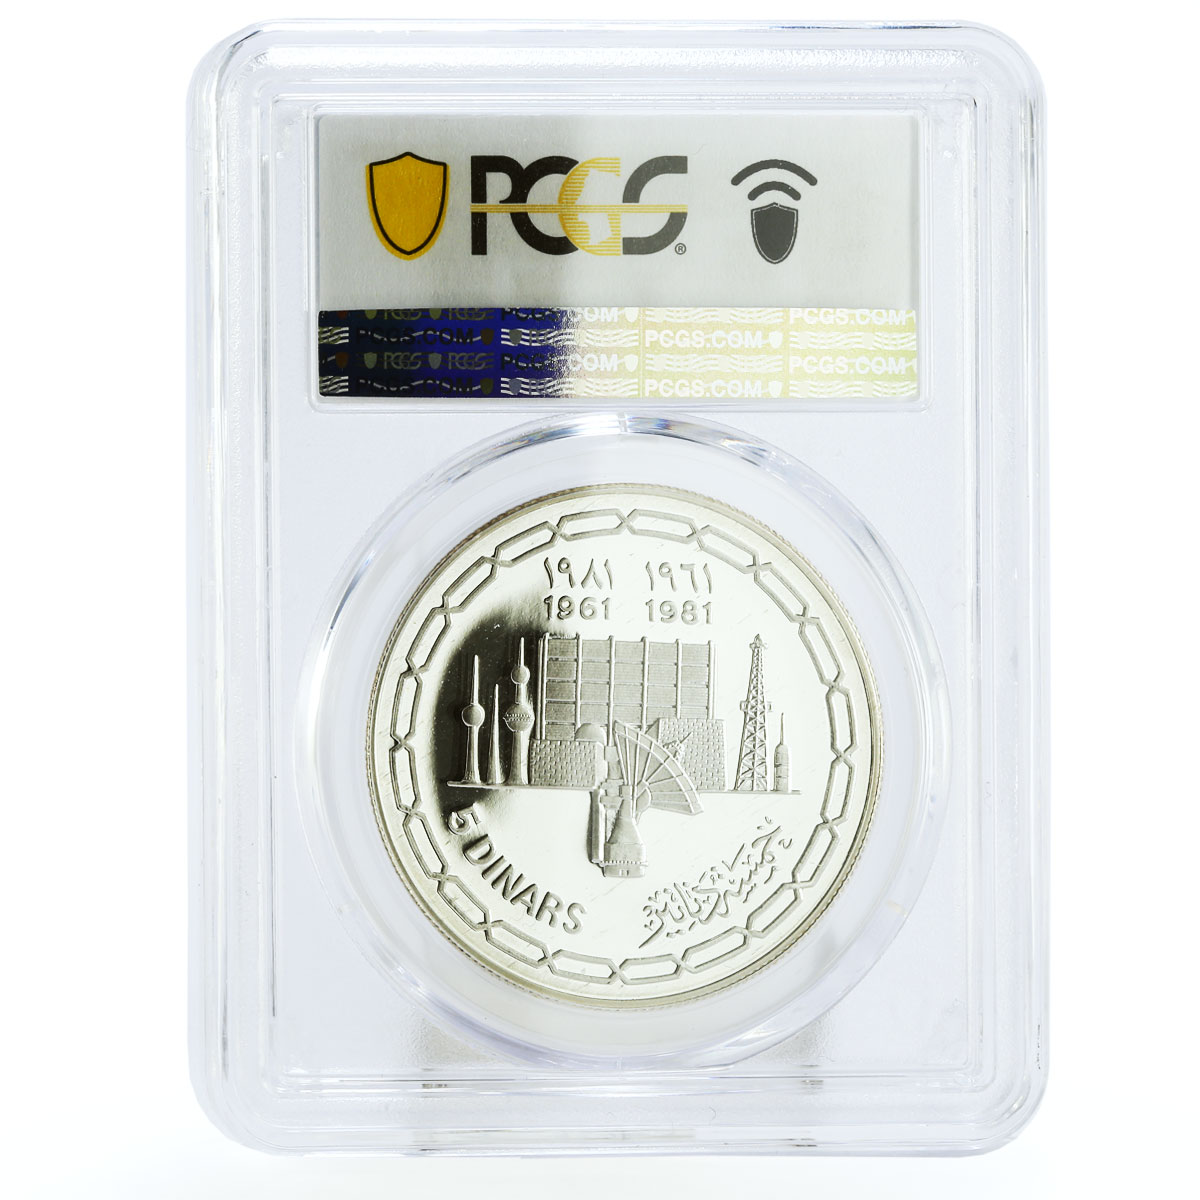 Kuwait 5 dinars National Day Buildings Architecture PR67 PCGS silver coin 1981